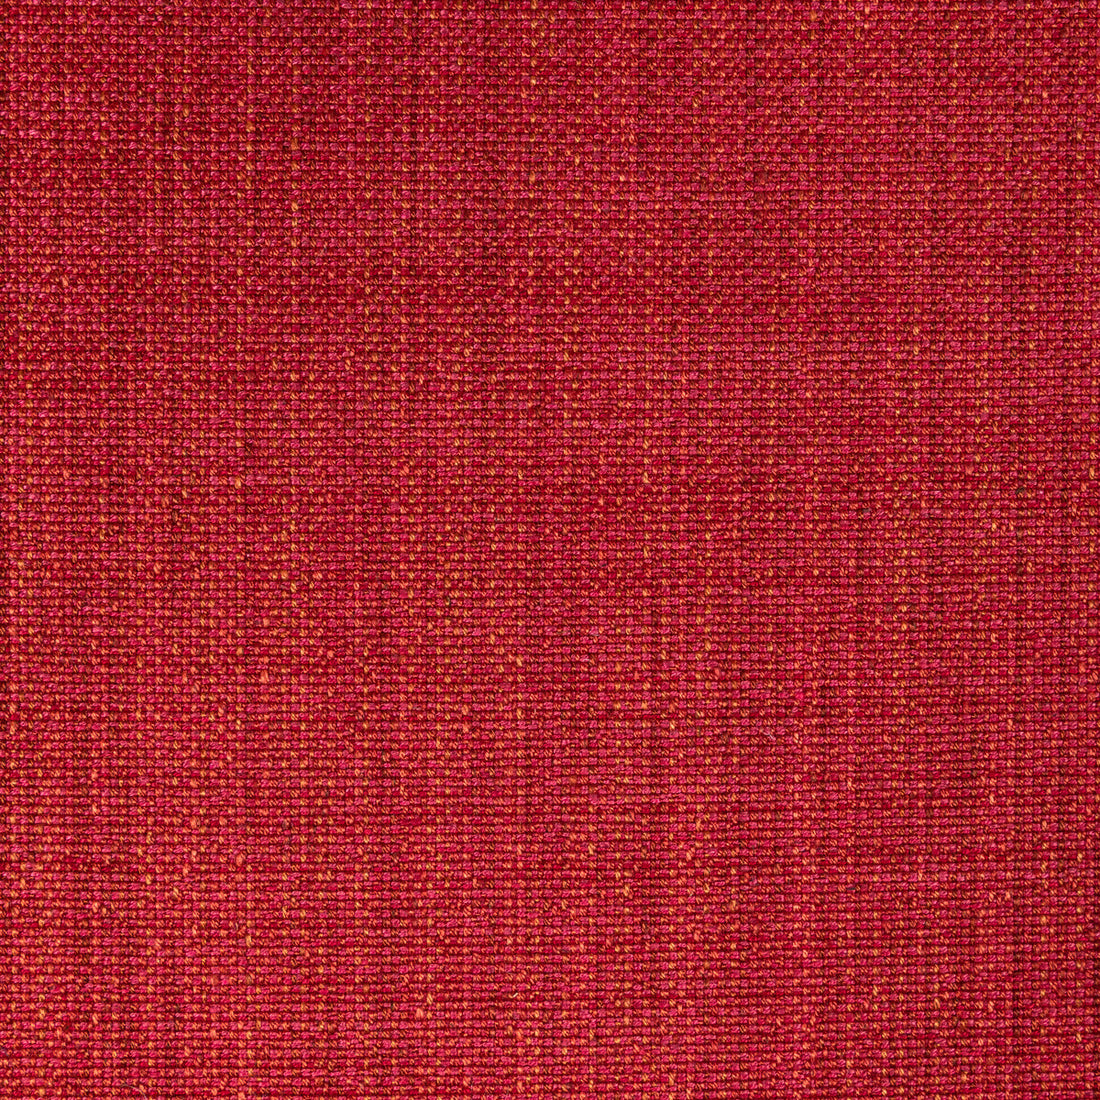 Rospico Plain fabric in red color - pattern 8022110.19.0 - by Brunschwig &amp; Fils in the Lorient Weaves collection